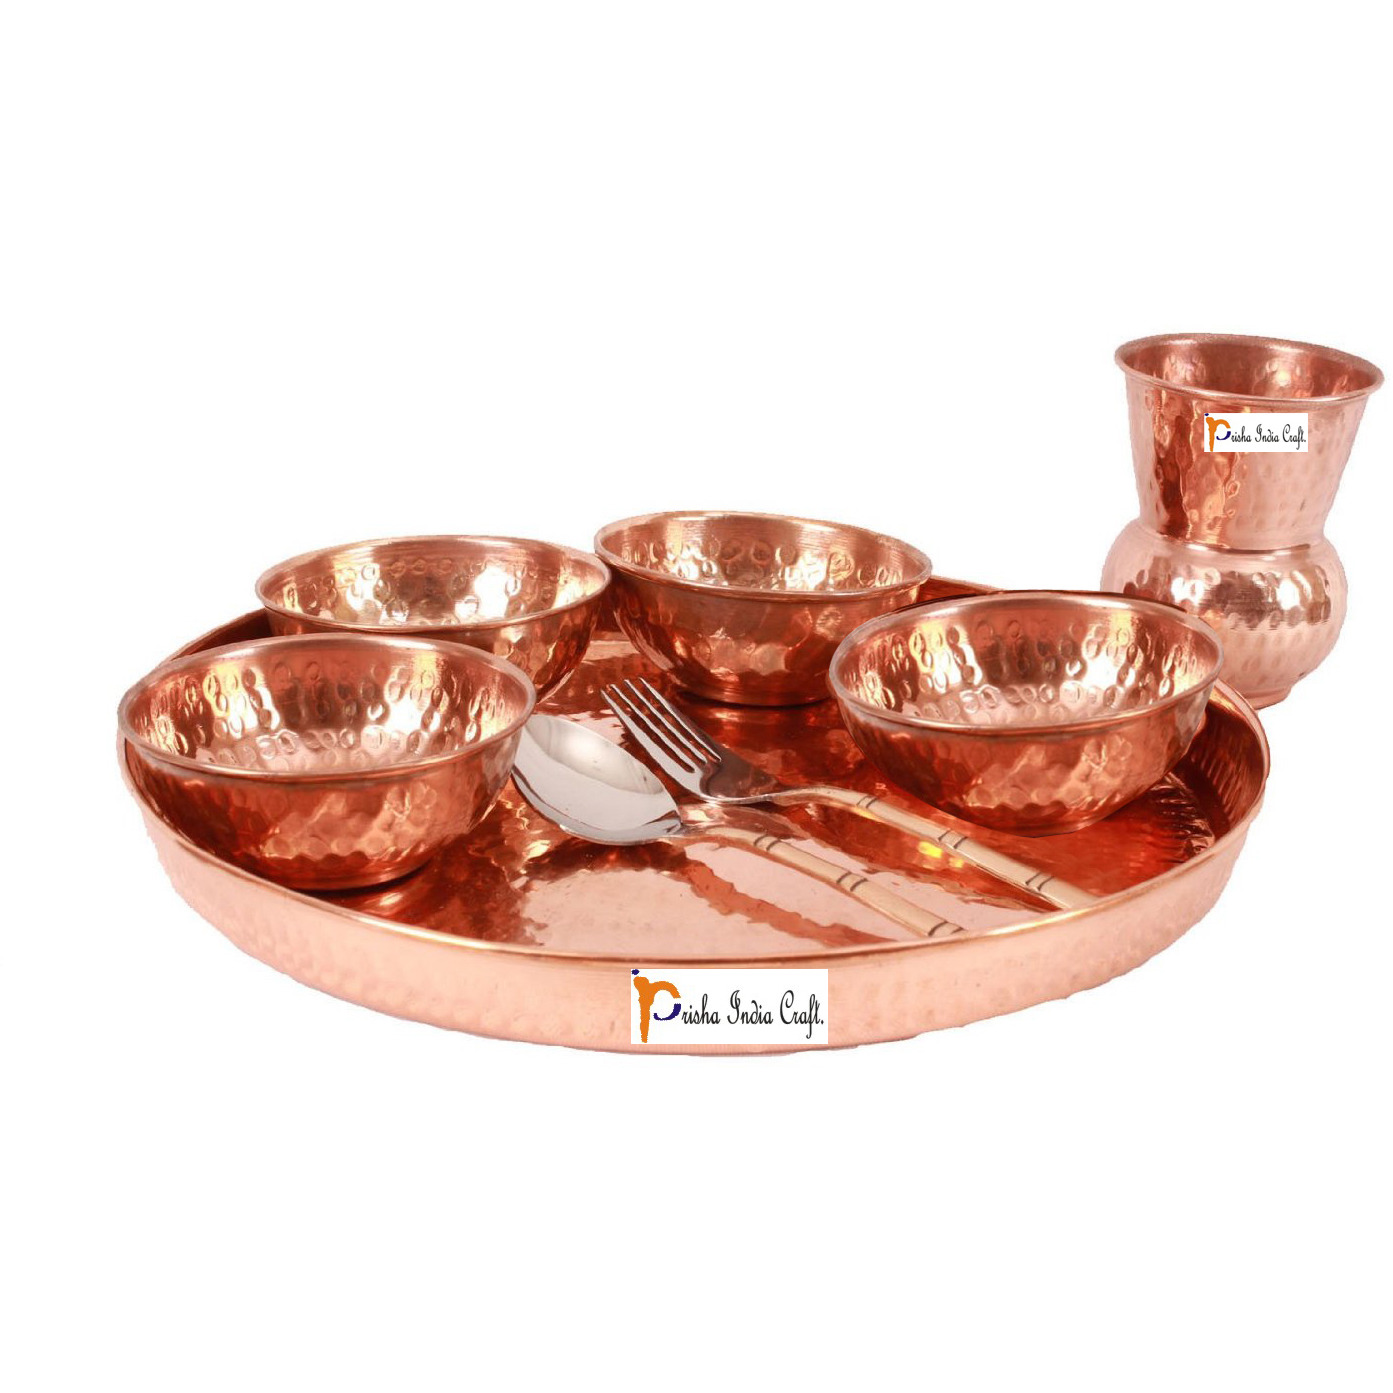 Prisha India Craft B. Set of 3 Dinnerware Traditional 100% Pure Copper Dinner Set of Thali Plate, Bowls, Glass and Spoon, Dia 12  With 1 Stainless Steel Copper Hammered Pitcher Jug - Christmas Gift